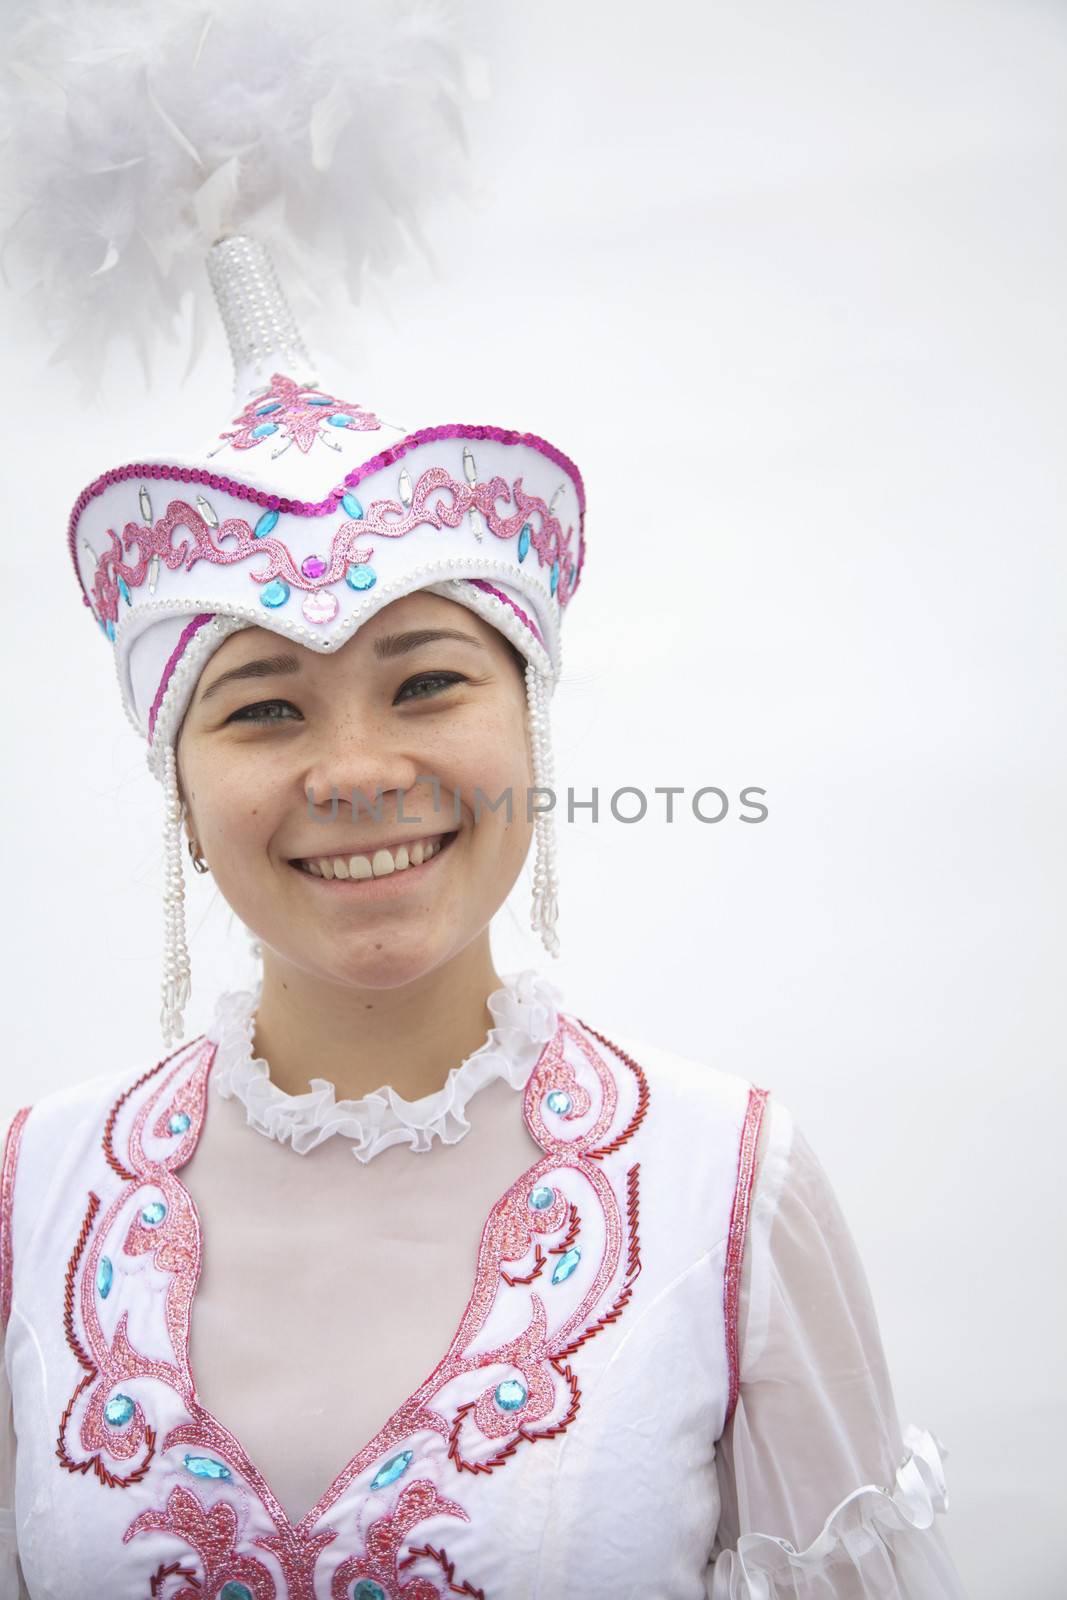 Portrait of young smiling woman in traditional clothing from Kazakhstan, studio shot